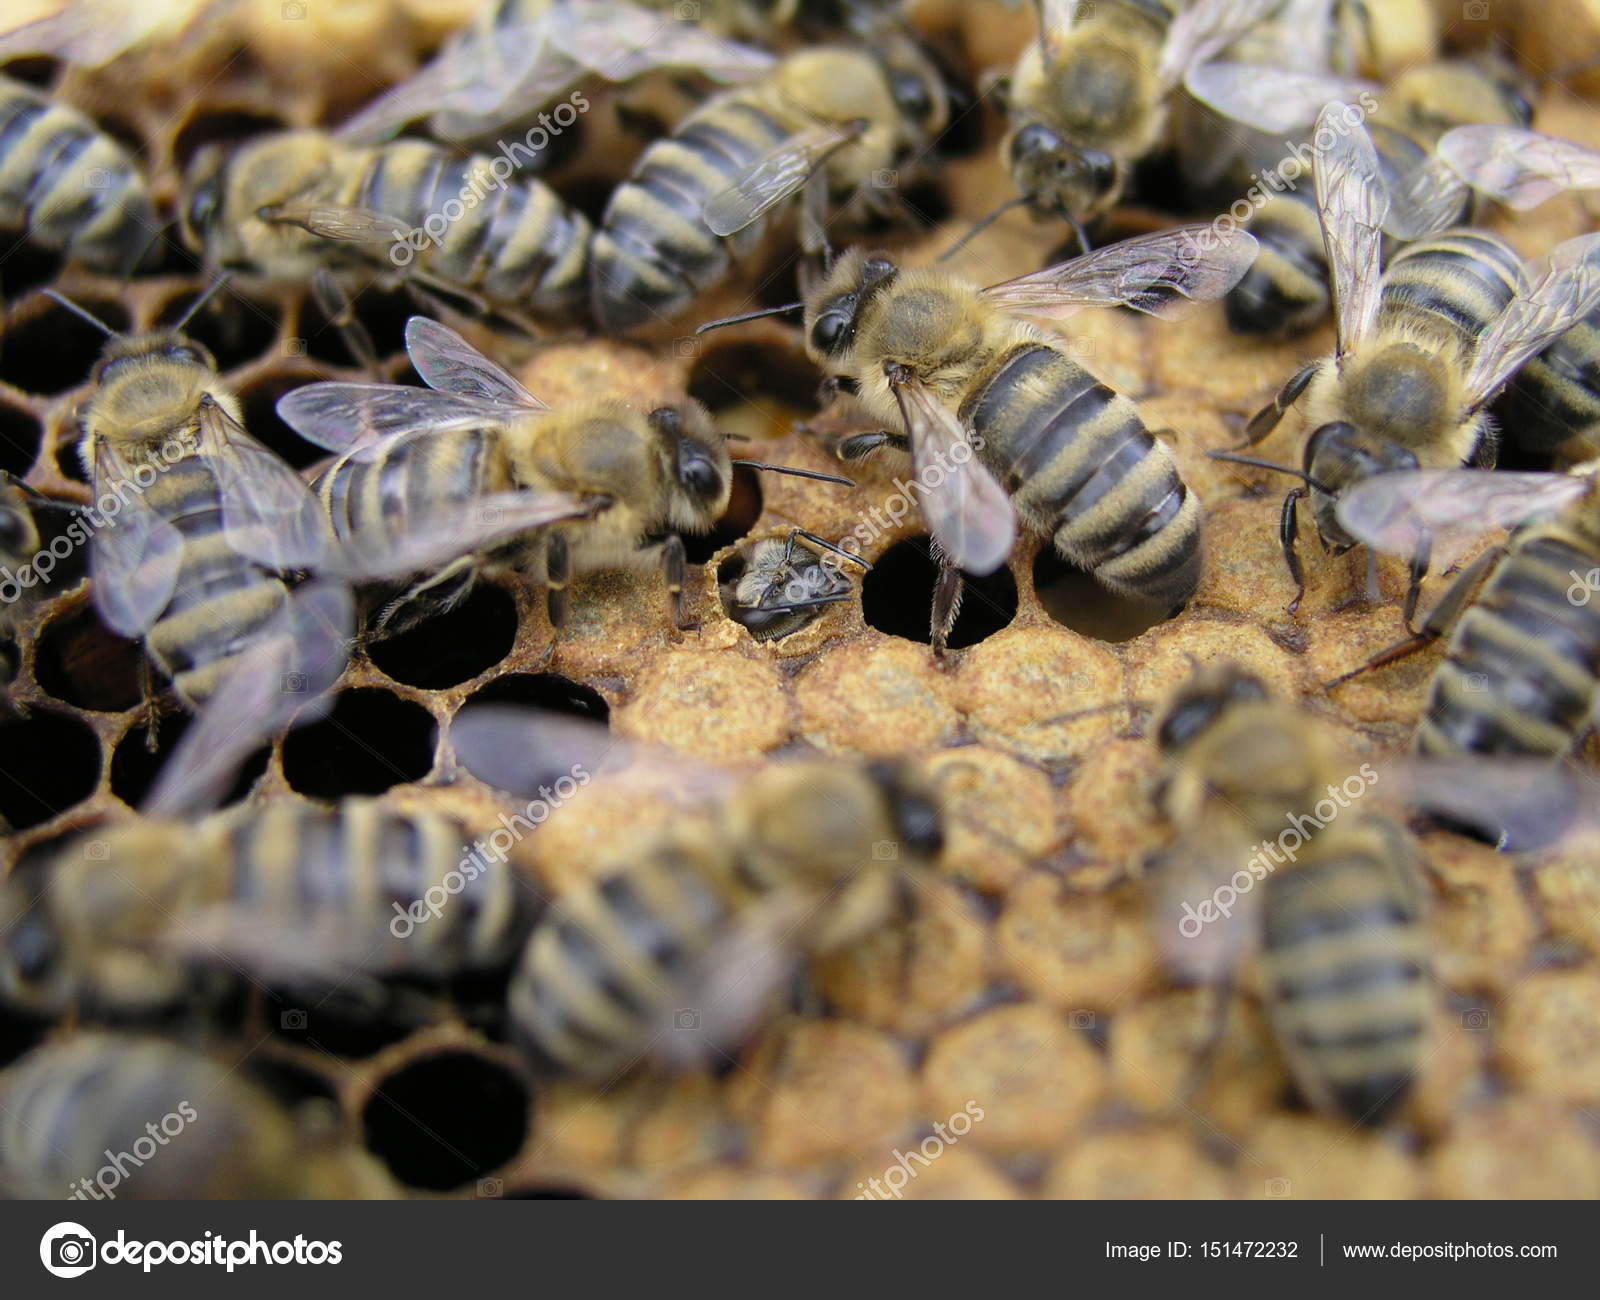 Why don't we see baby bees? - Quora